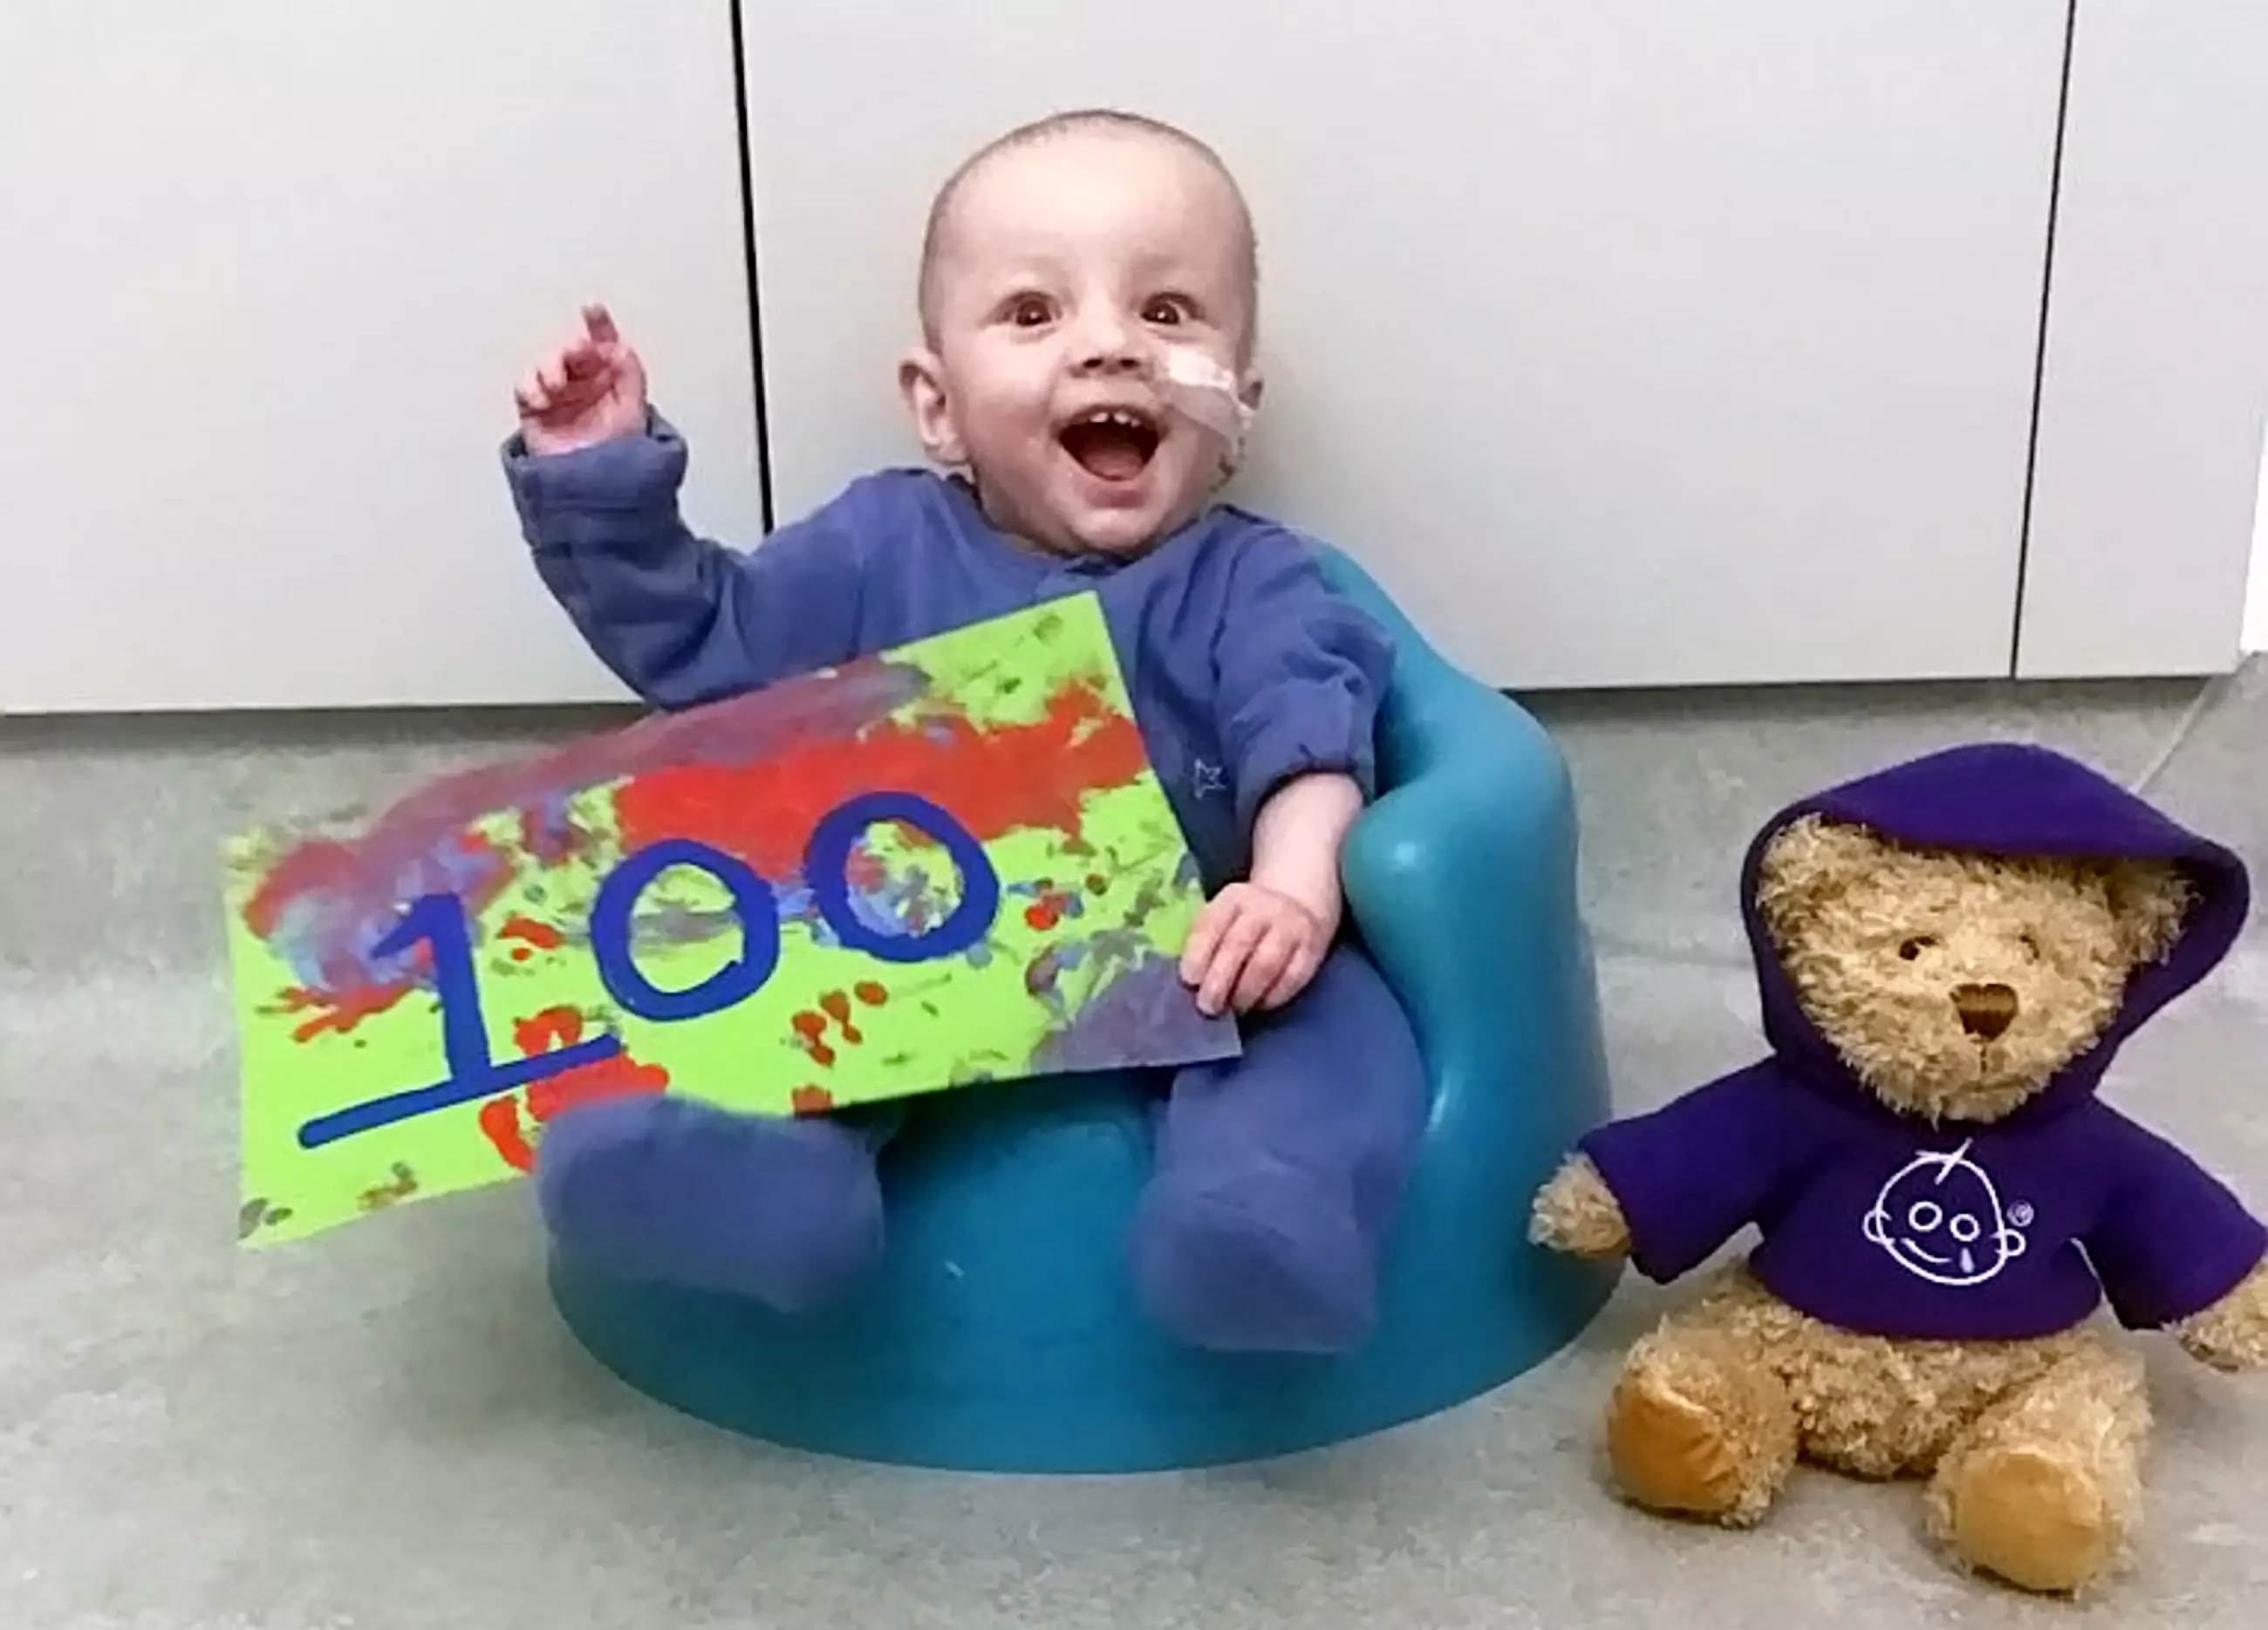 Freddie on his 100th day at Great Ormond Street Hospital.